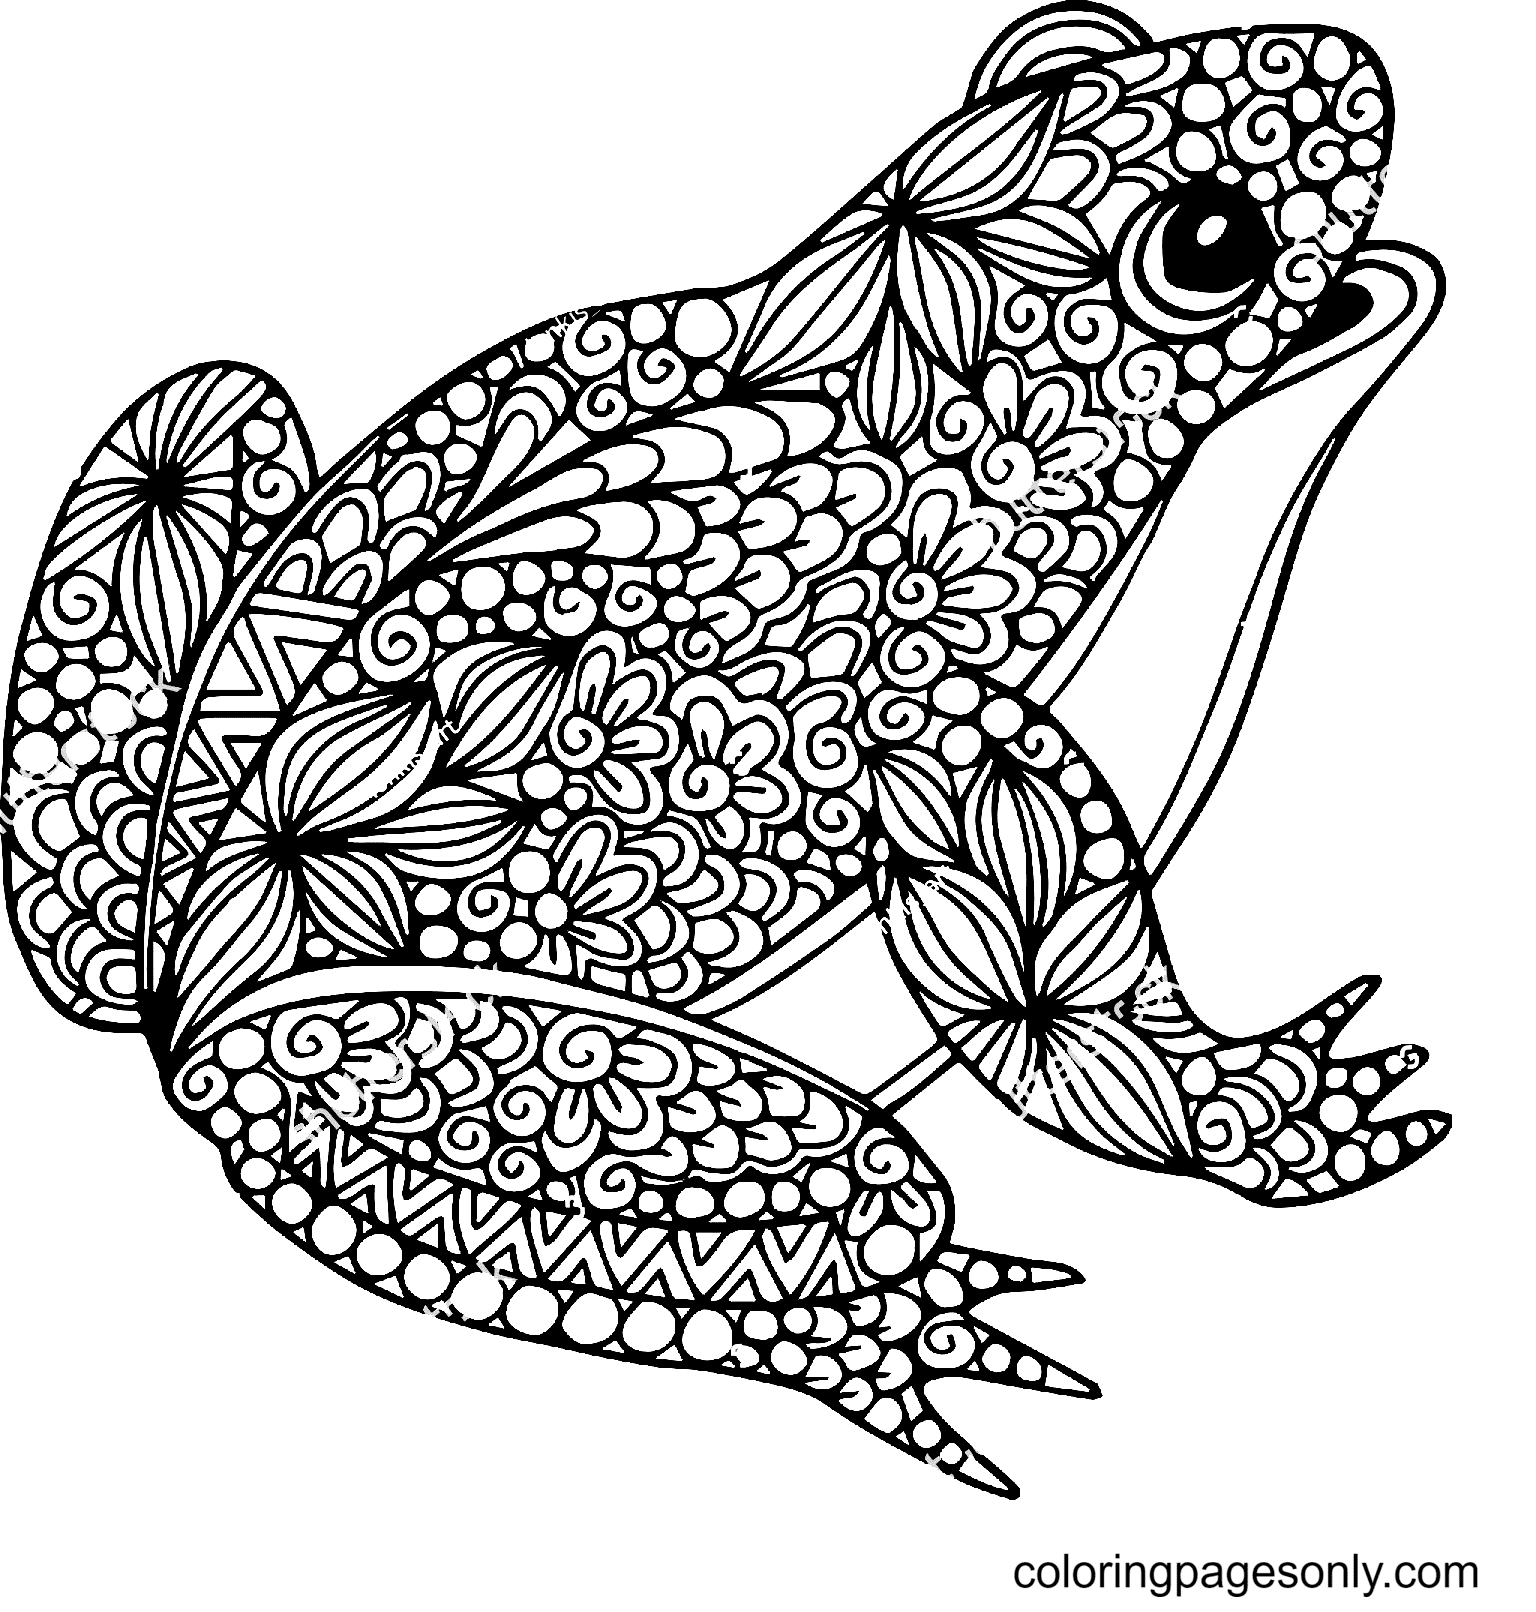 Happy Laughing Frog Coloring Page